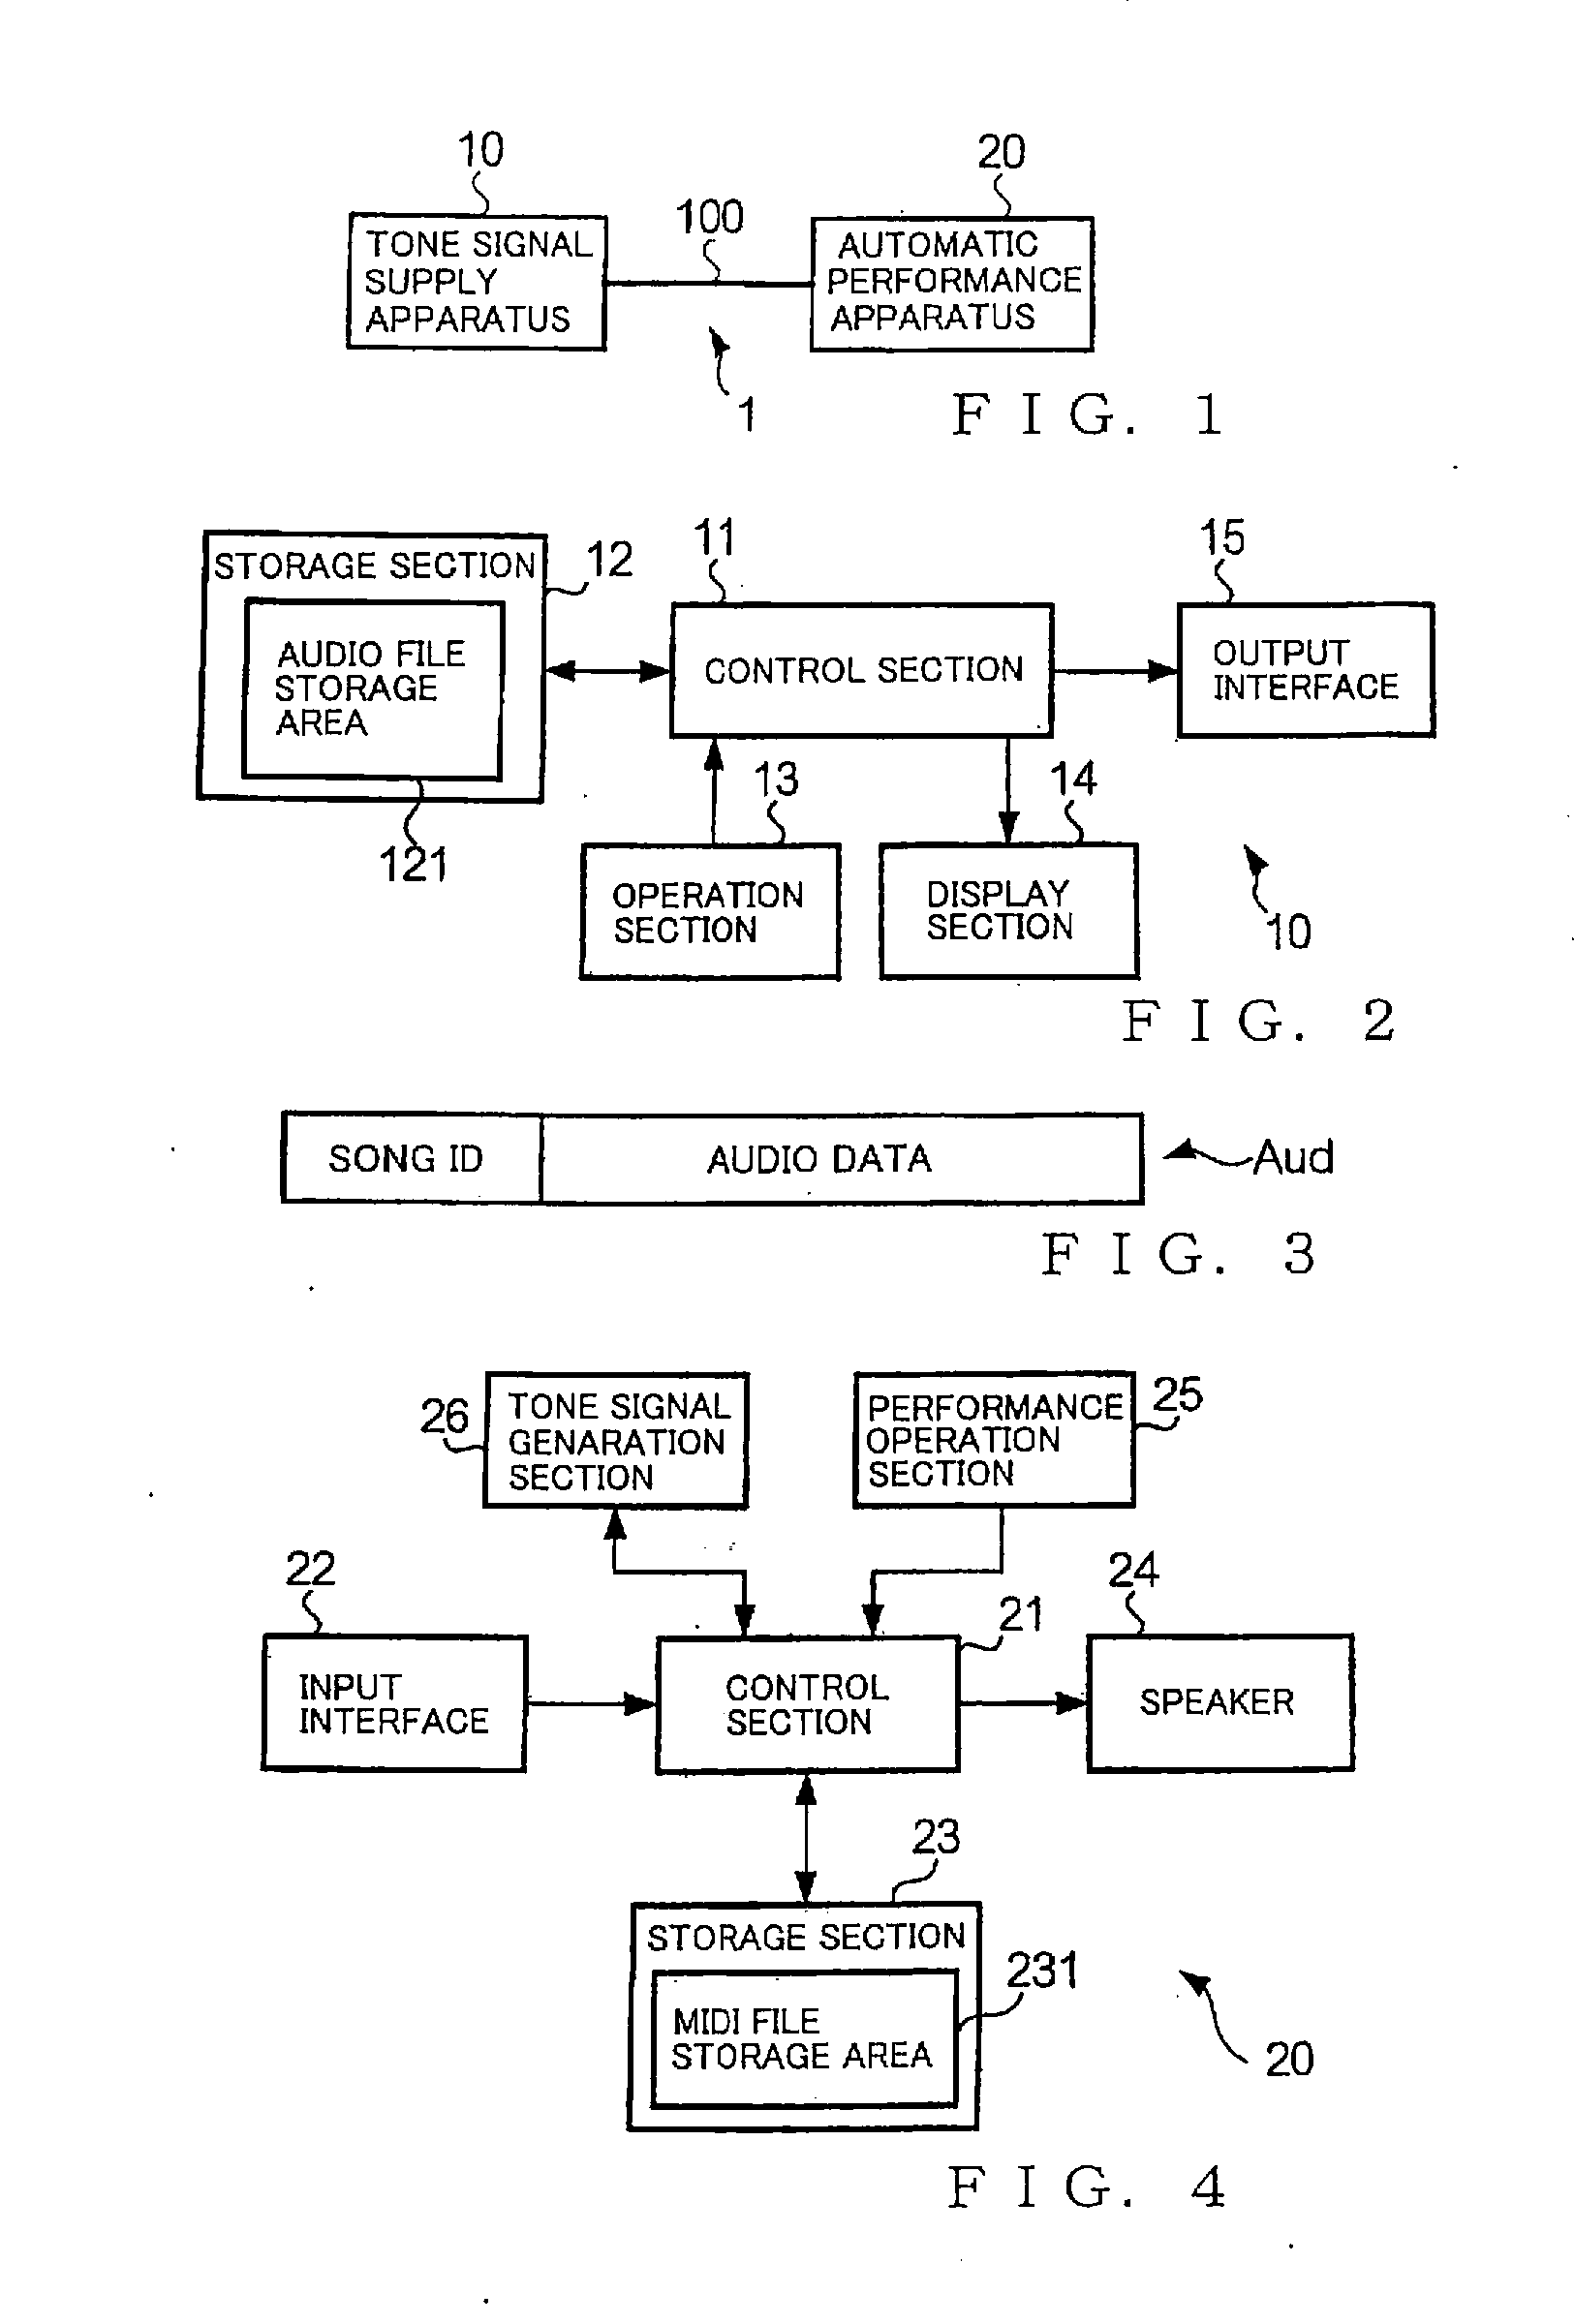 Tone reproduction apparatus and method